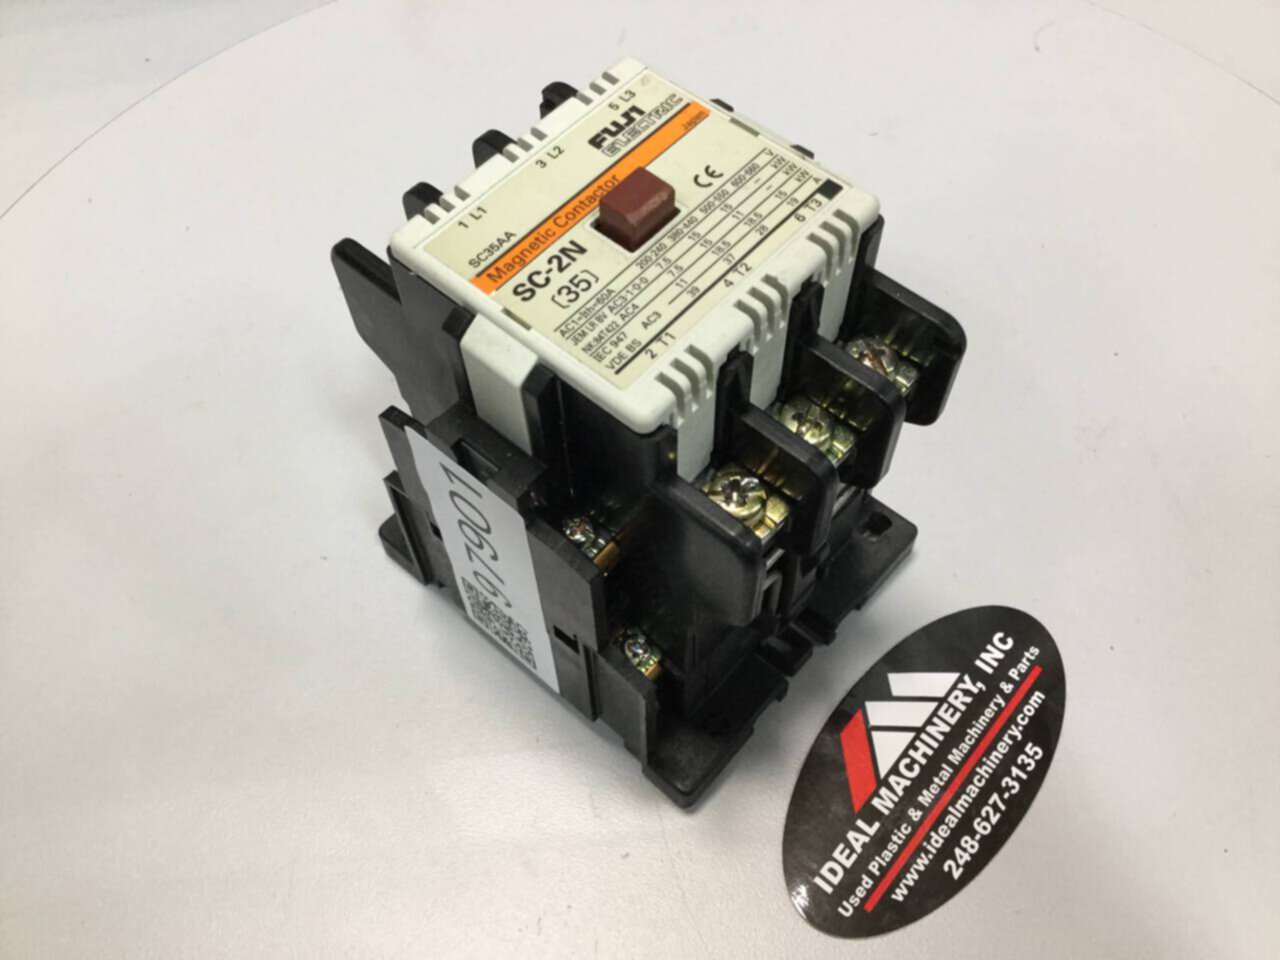 FUJI SC-2N  MAGNETIC CONTACTOR 100V TR2N OVERLOAD RELAY  #S835